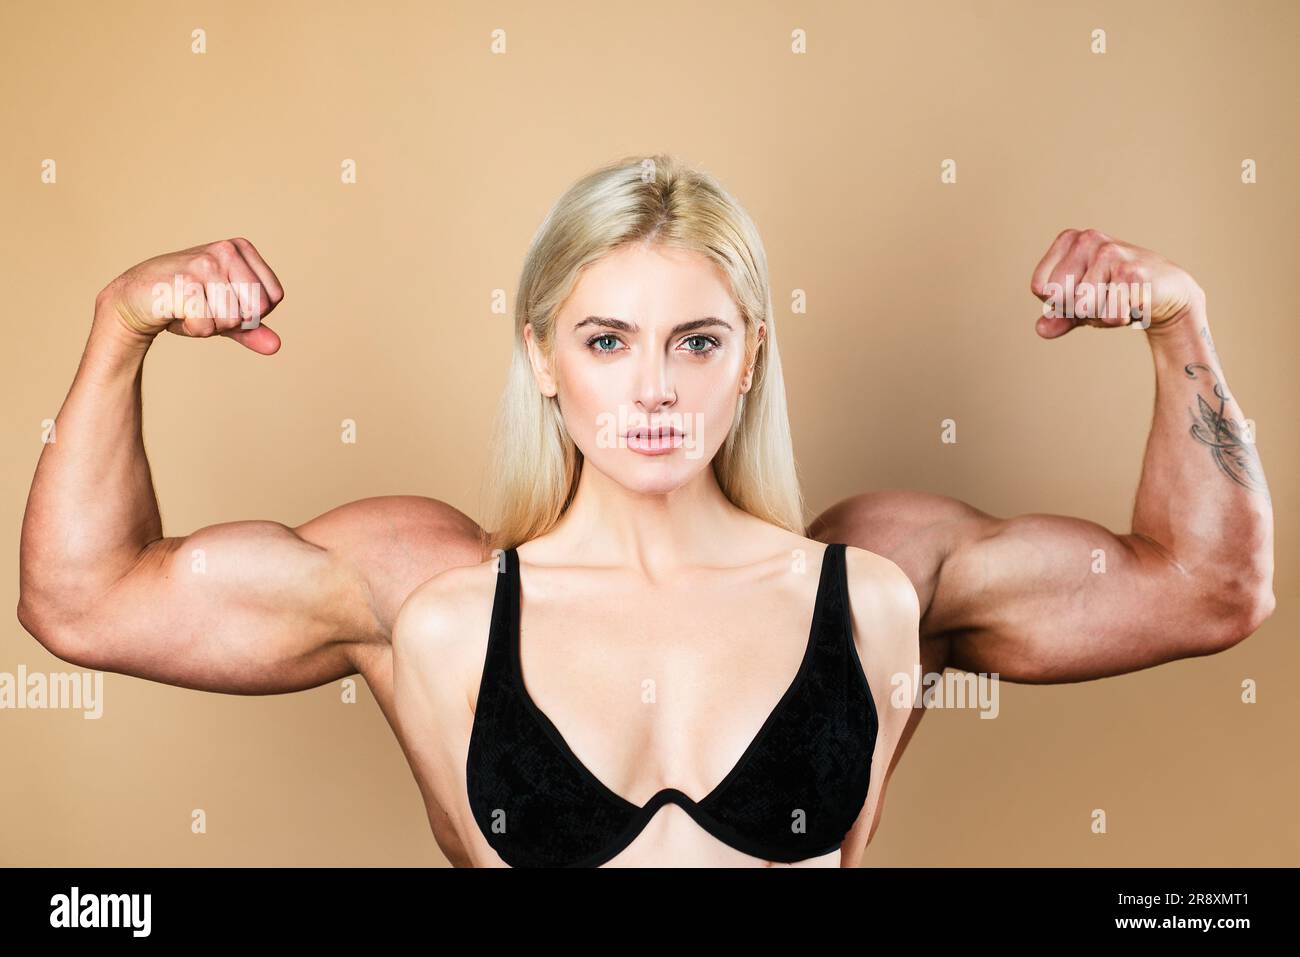 Fit Woman Flexing Back Muscles Stock Photo - Download Image Now